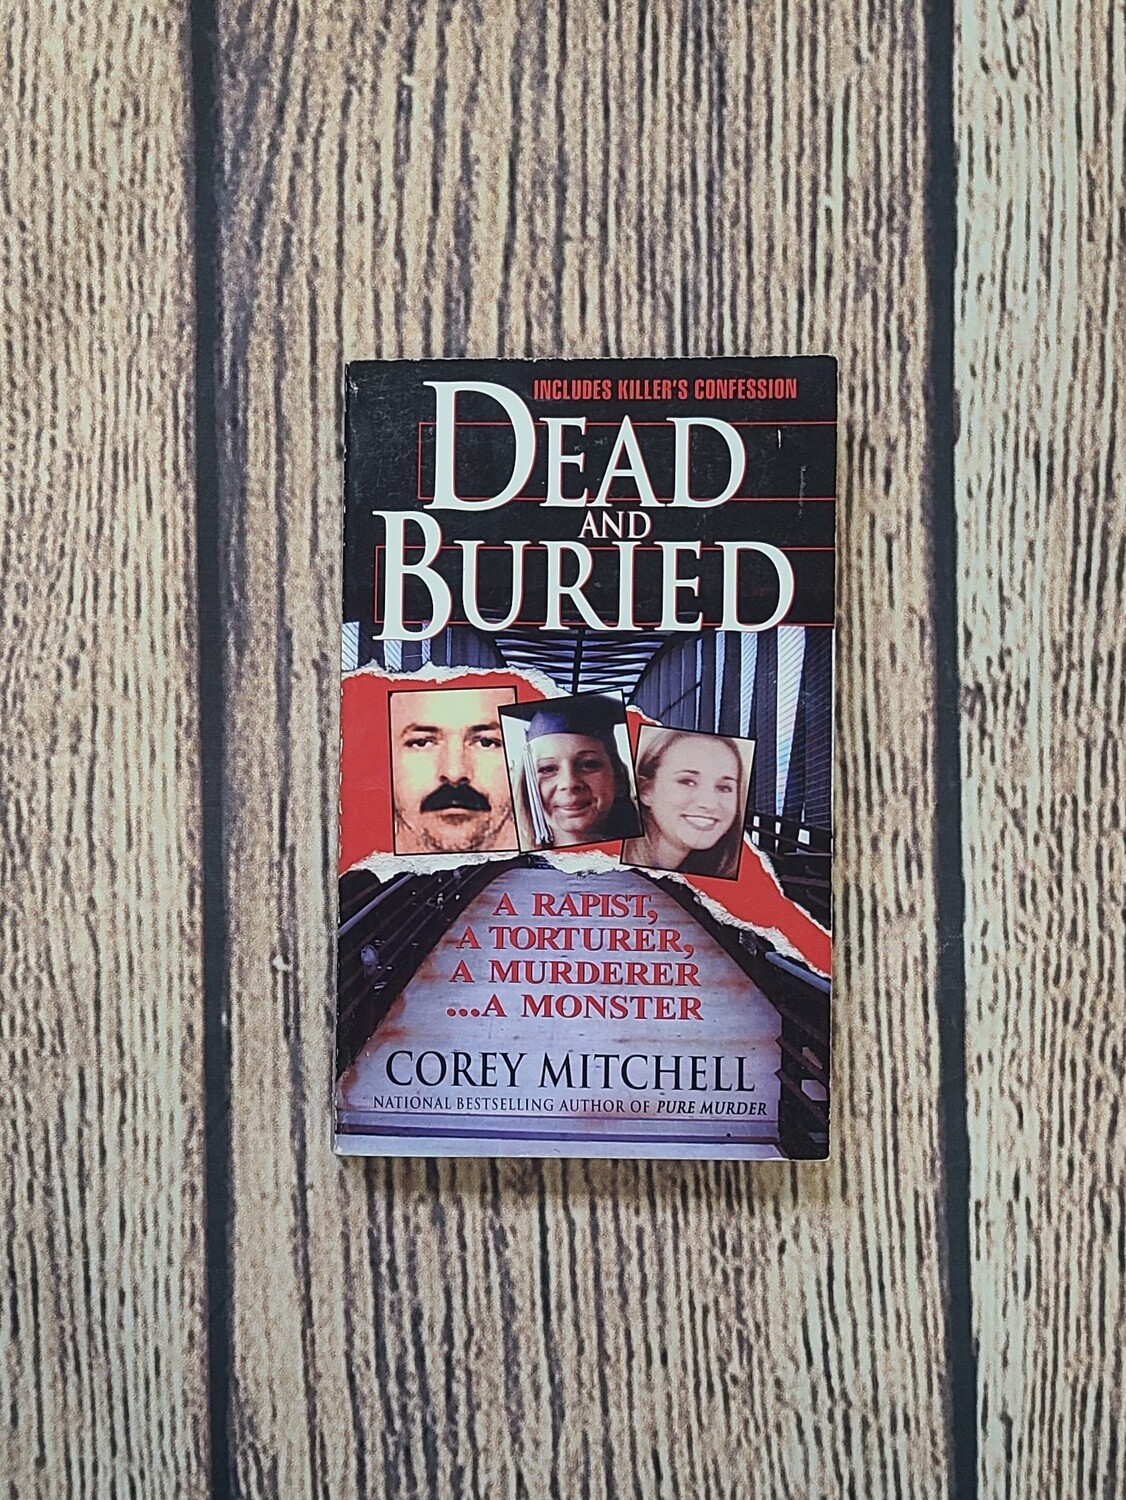 Dead and Buried by Corey Mitchell